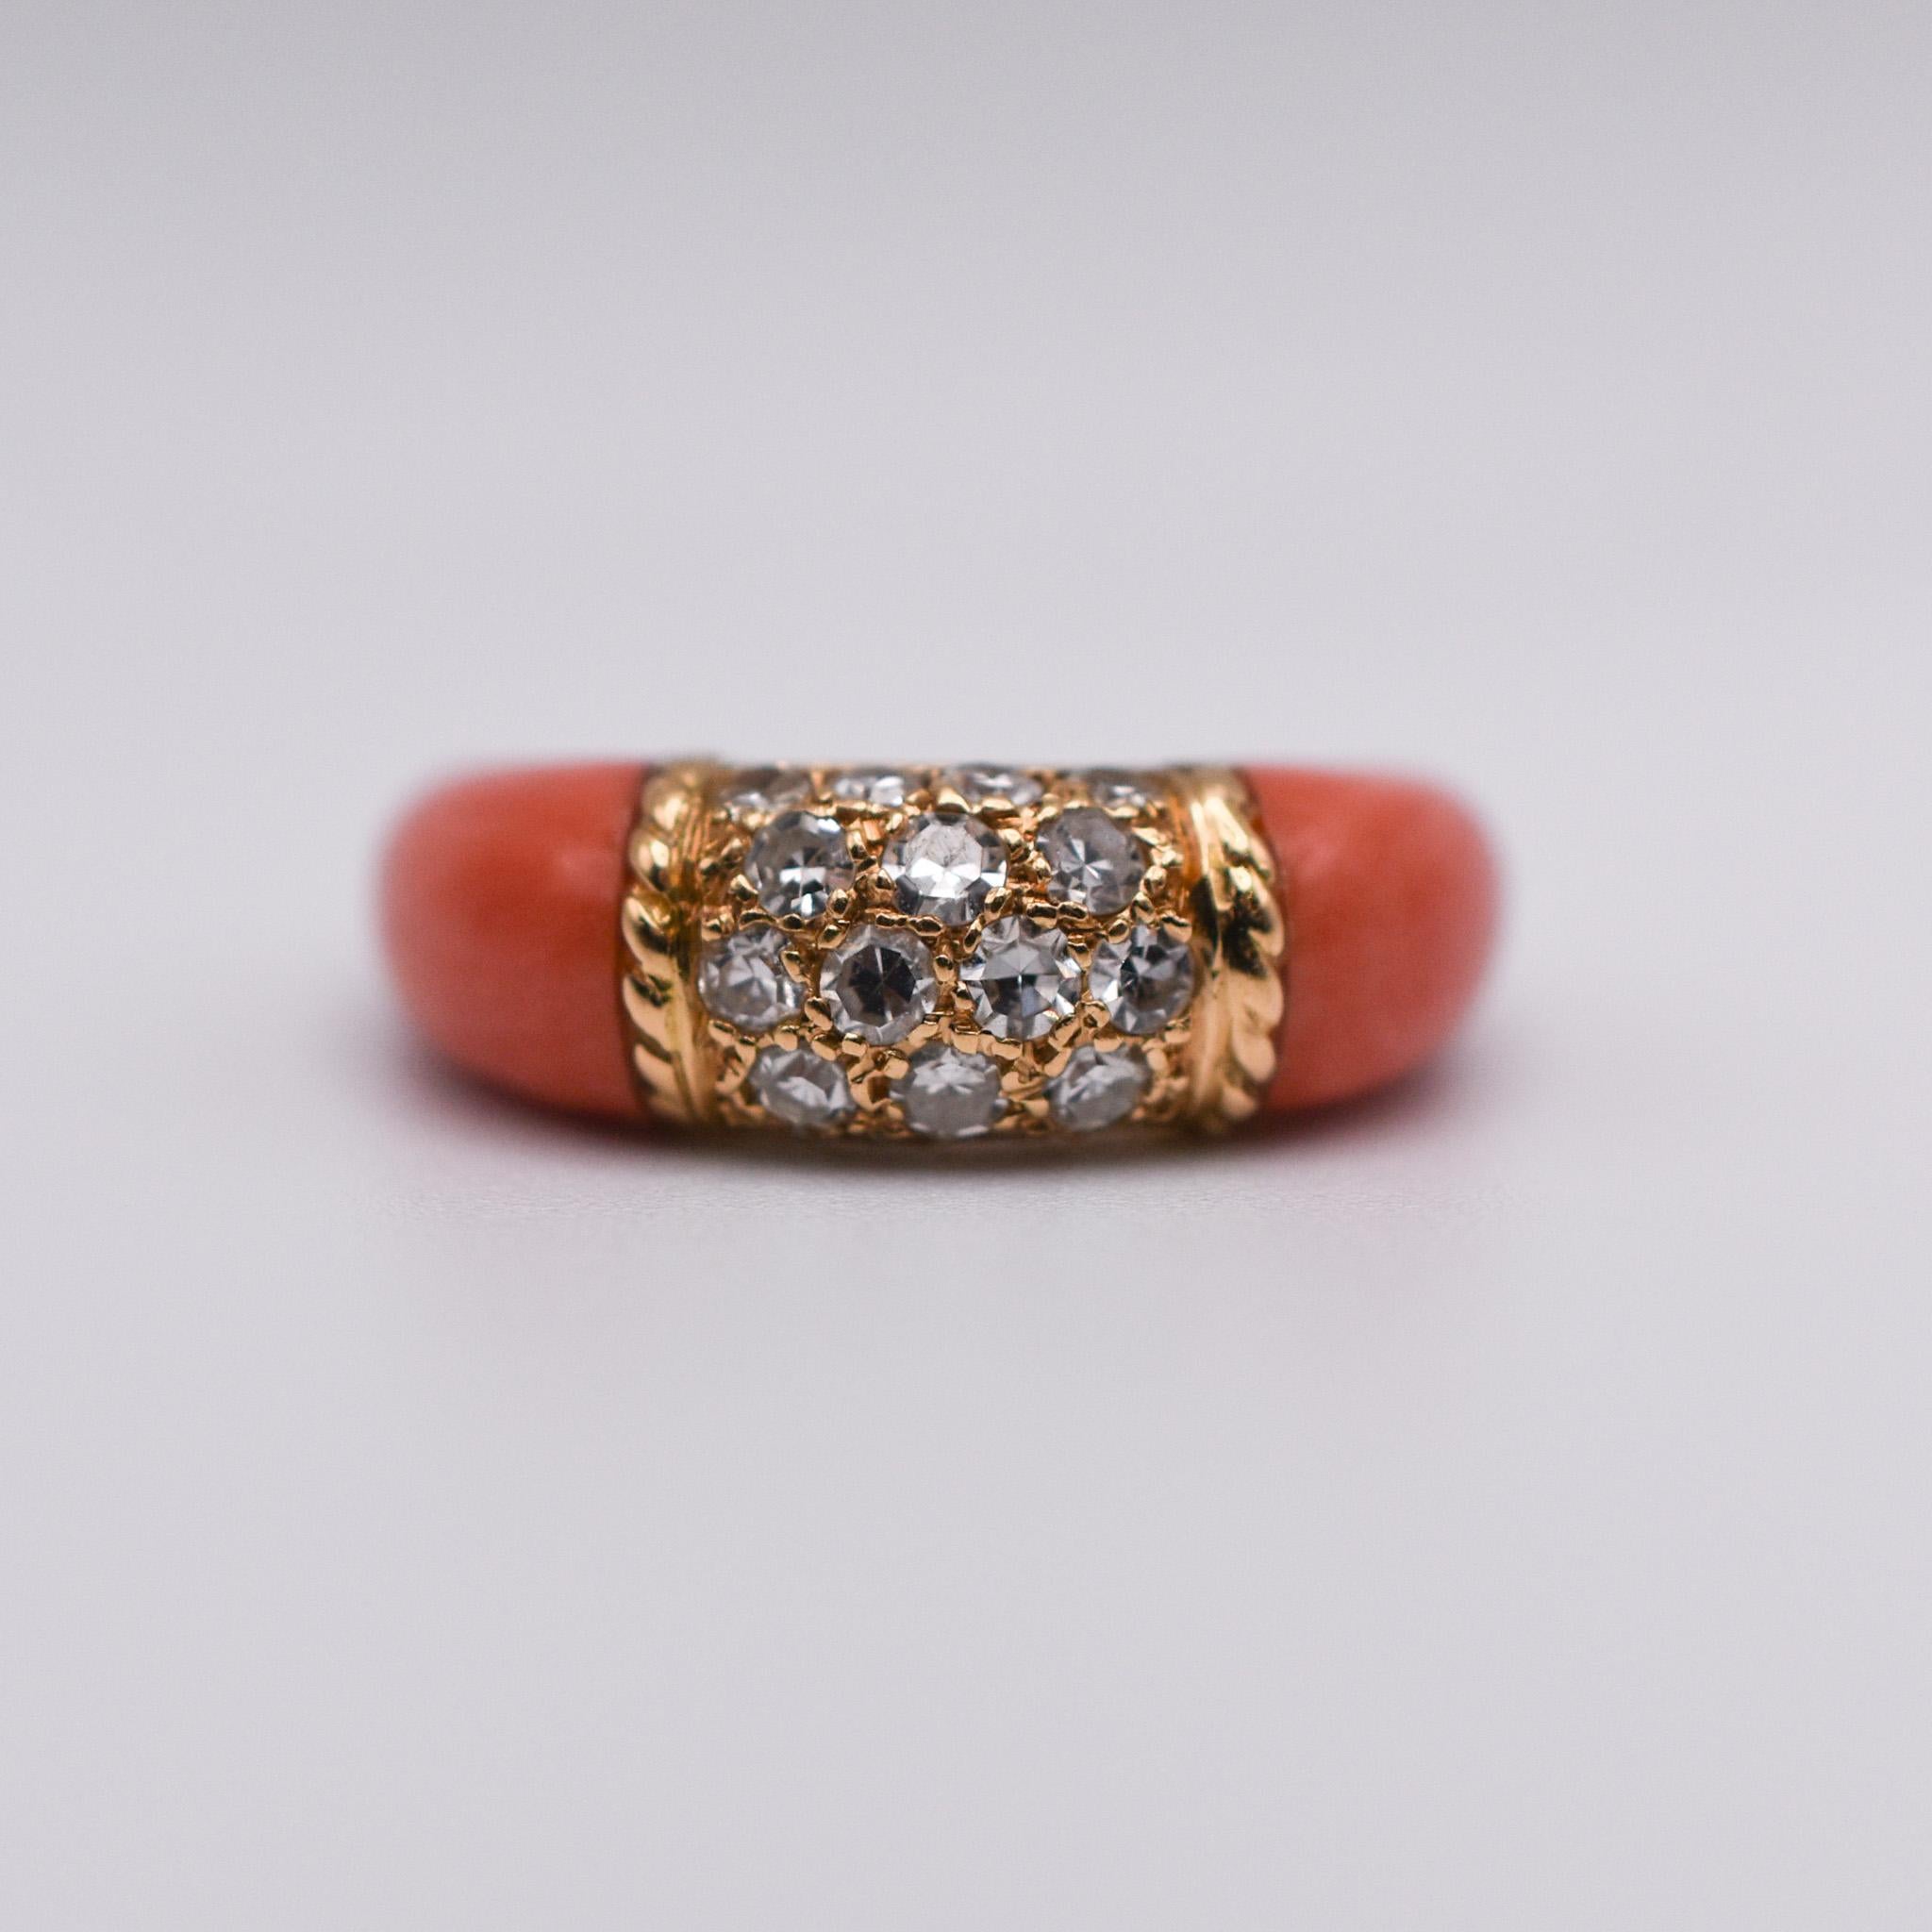 Van Cleef & Arpels Coral and Diamond ‘Philippine’ Ring in 18k Yellow Gold
Made in France, circa 1960.
Signed VCA and numbered.

Ring size: US 4.75